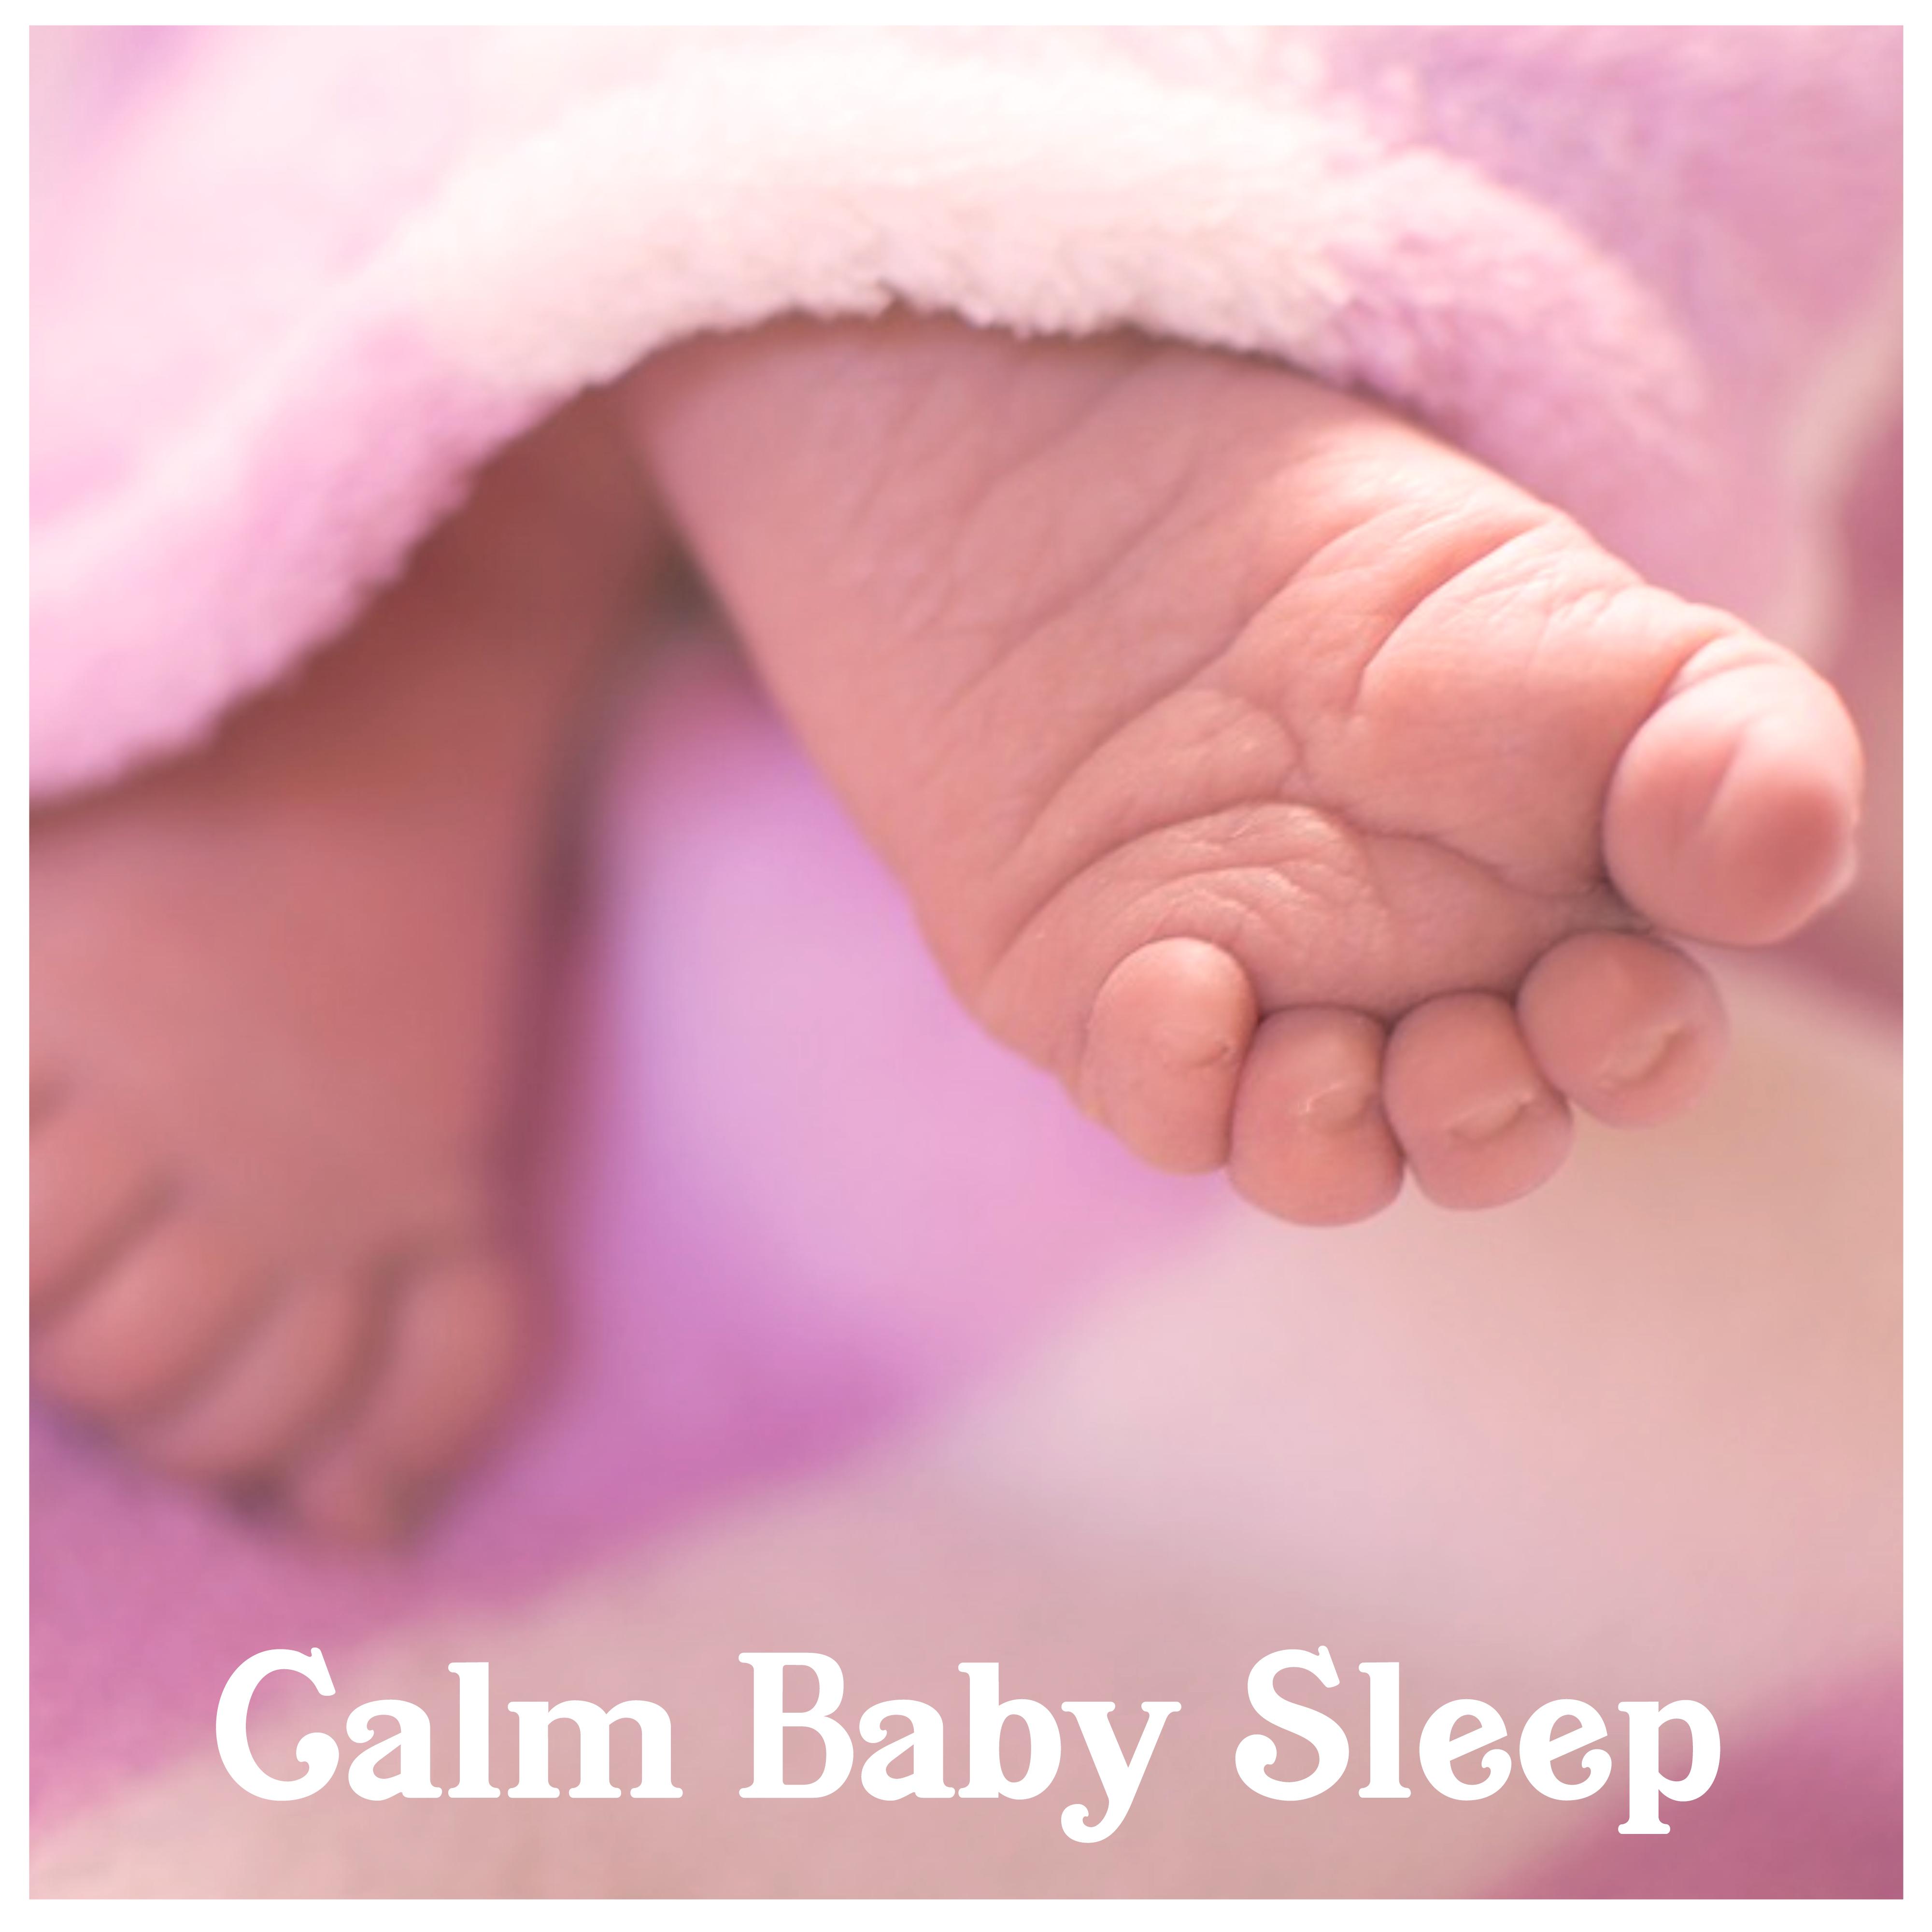 Calm Baby Sleep – Relaxing Sounds for Baby, New Age Lullabies, Night Music, Relax Your Baby, Soothing Sounds